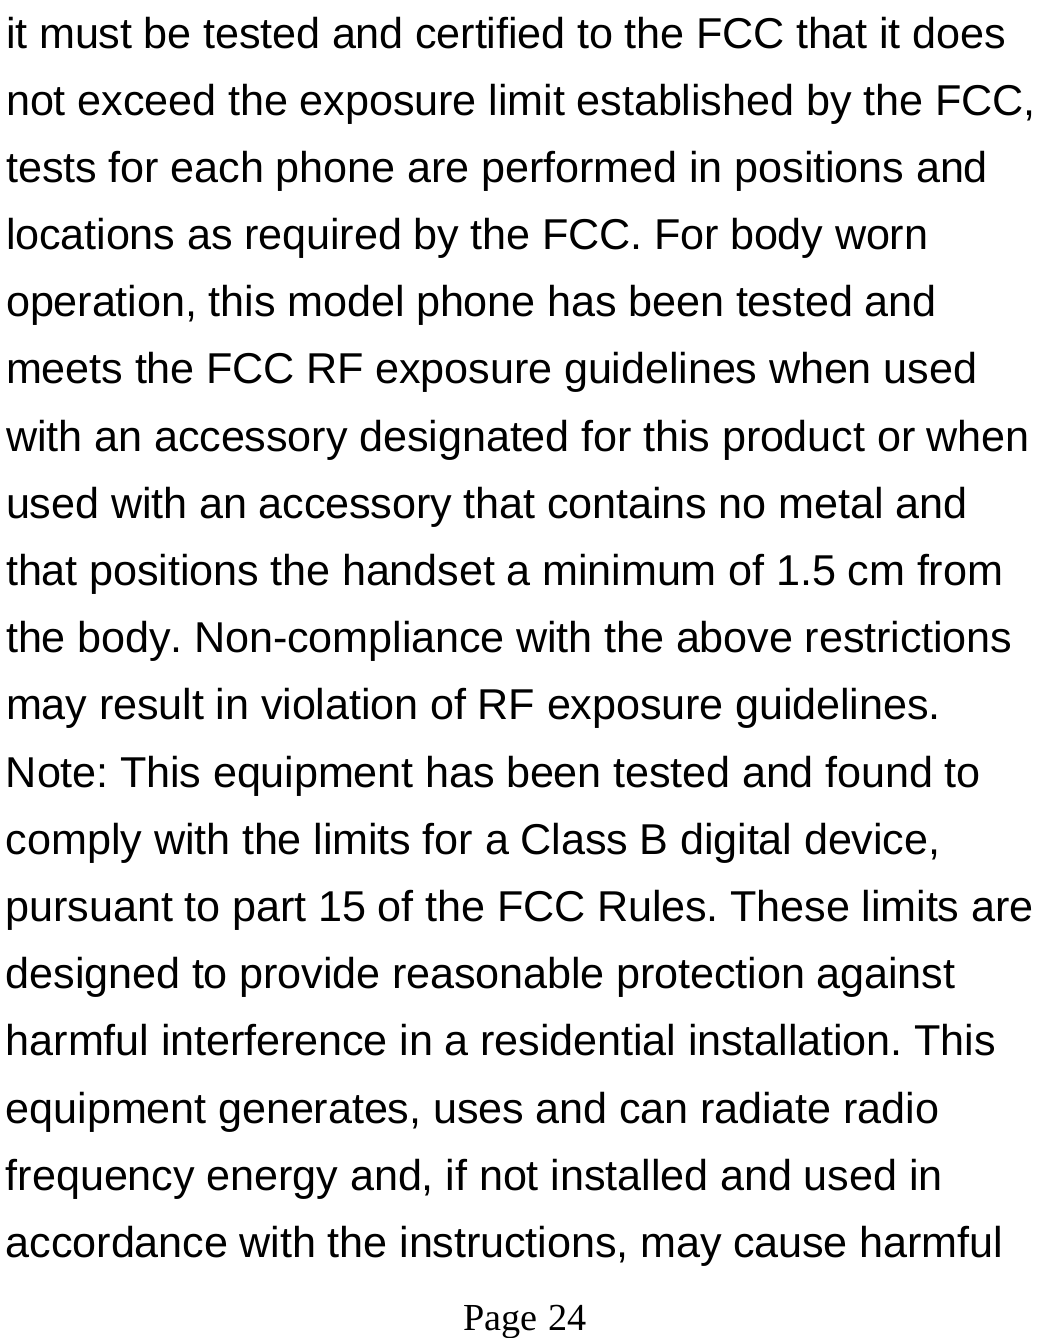 Page 24it must be tested and certified to the FCC that it does not exceed the exposure limit established by the FCC, tests for each phone are performed in positions and locations as required by the FCC. For body worn operation, this model phone has been tested and meets the FCC RF exposure guidelines when used with an accessory designated for this product or when used with an accessory that contains no metal and that positions the handset a minimum of 1.5 cm from the body. Non-compliance with the above restrictions may result in violation of RF exposure guidelines. Note: This equipment has been tested and found to comply with the limits for a Class B digital device, pursuant to part 15 of the FCC Rules. These limits are designed to provide reasonable protection against harmful interference in a residential installation. This equipment generates, uses and can radiate radio frequency energy and, if not installed and used in accordance with the instructions, may cause harmful 